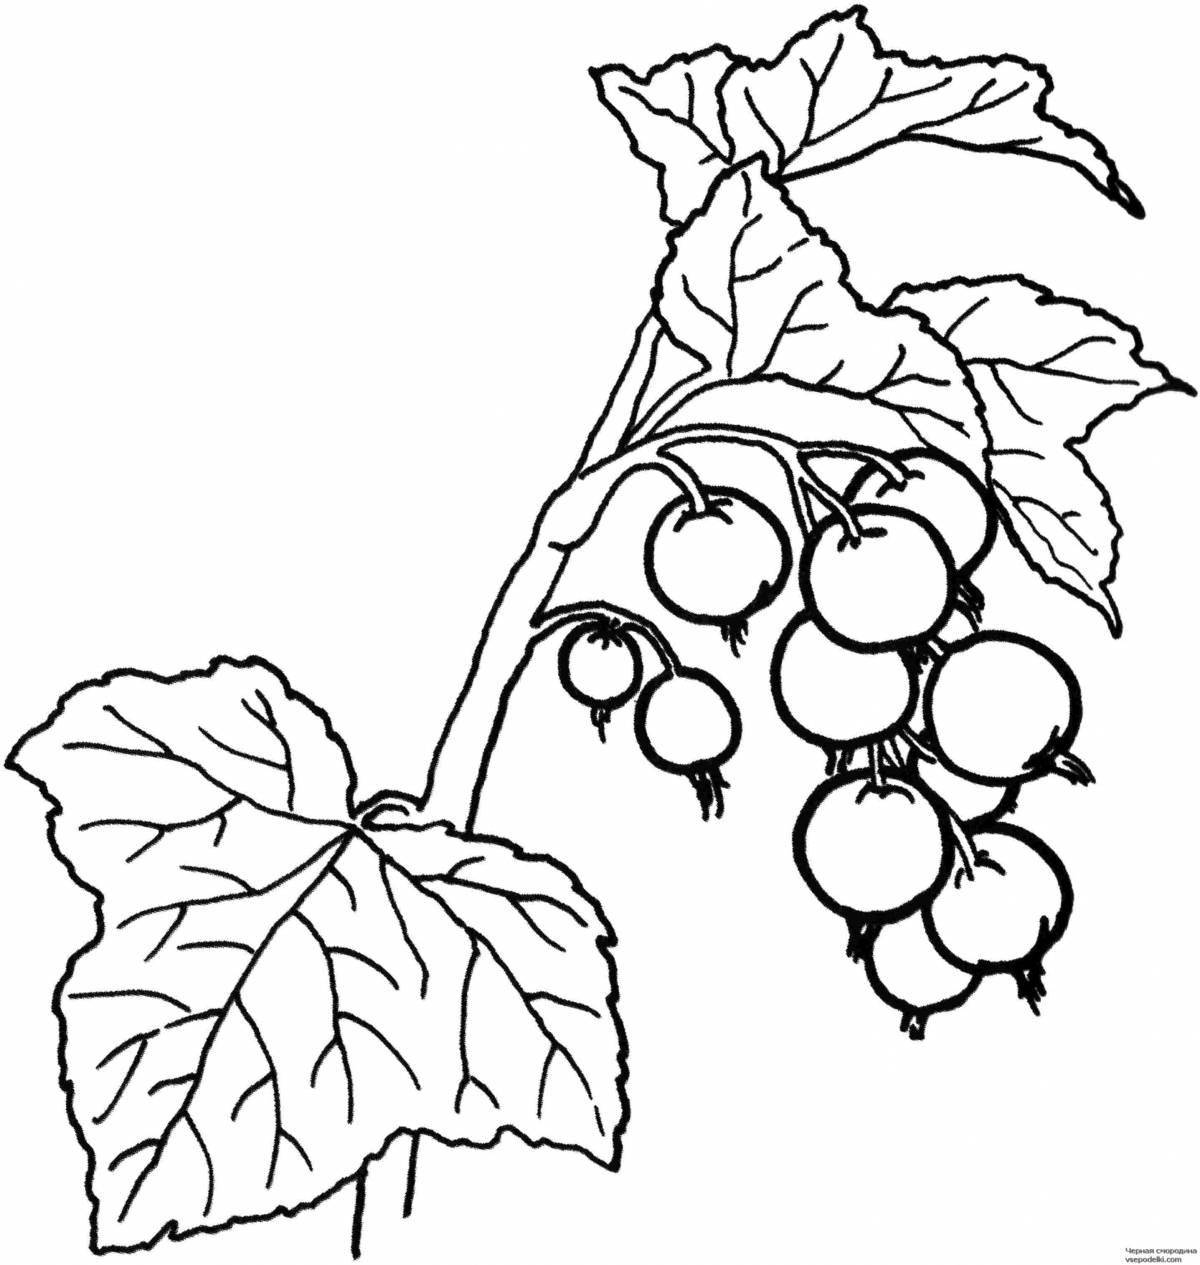 Berry coloring pages for kids